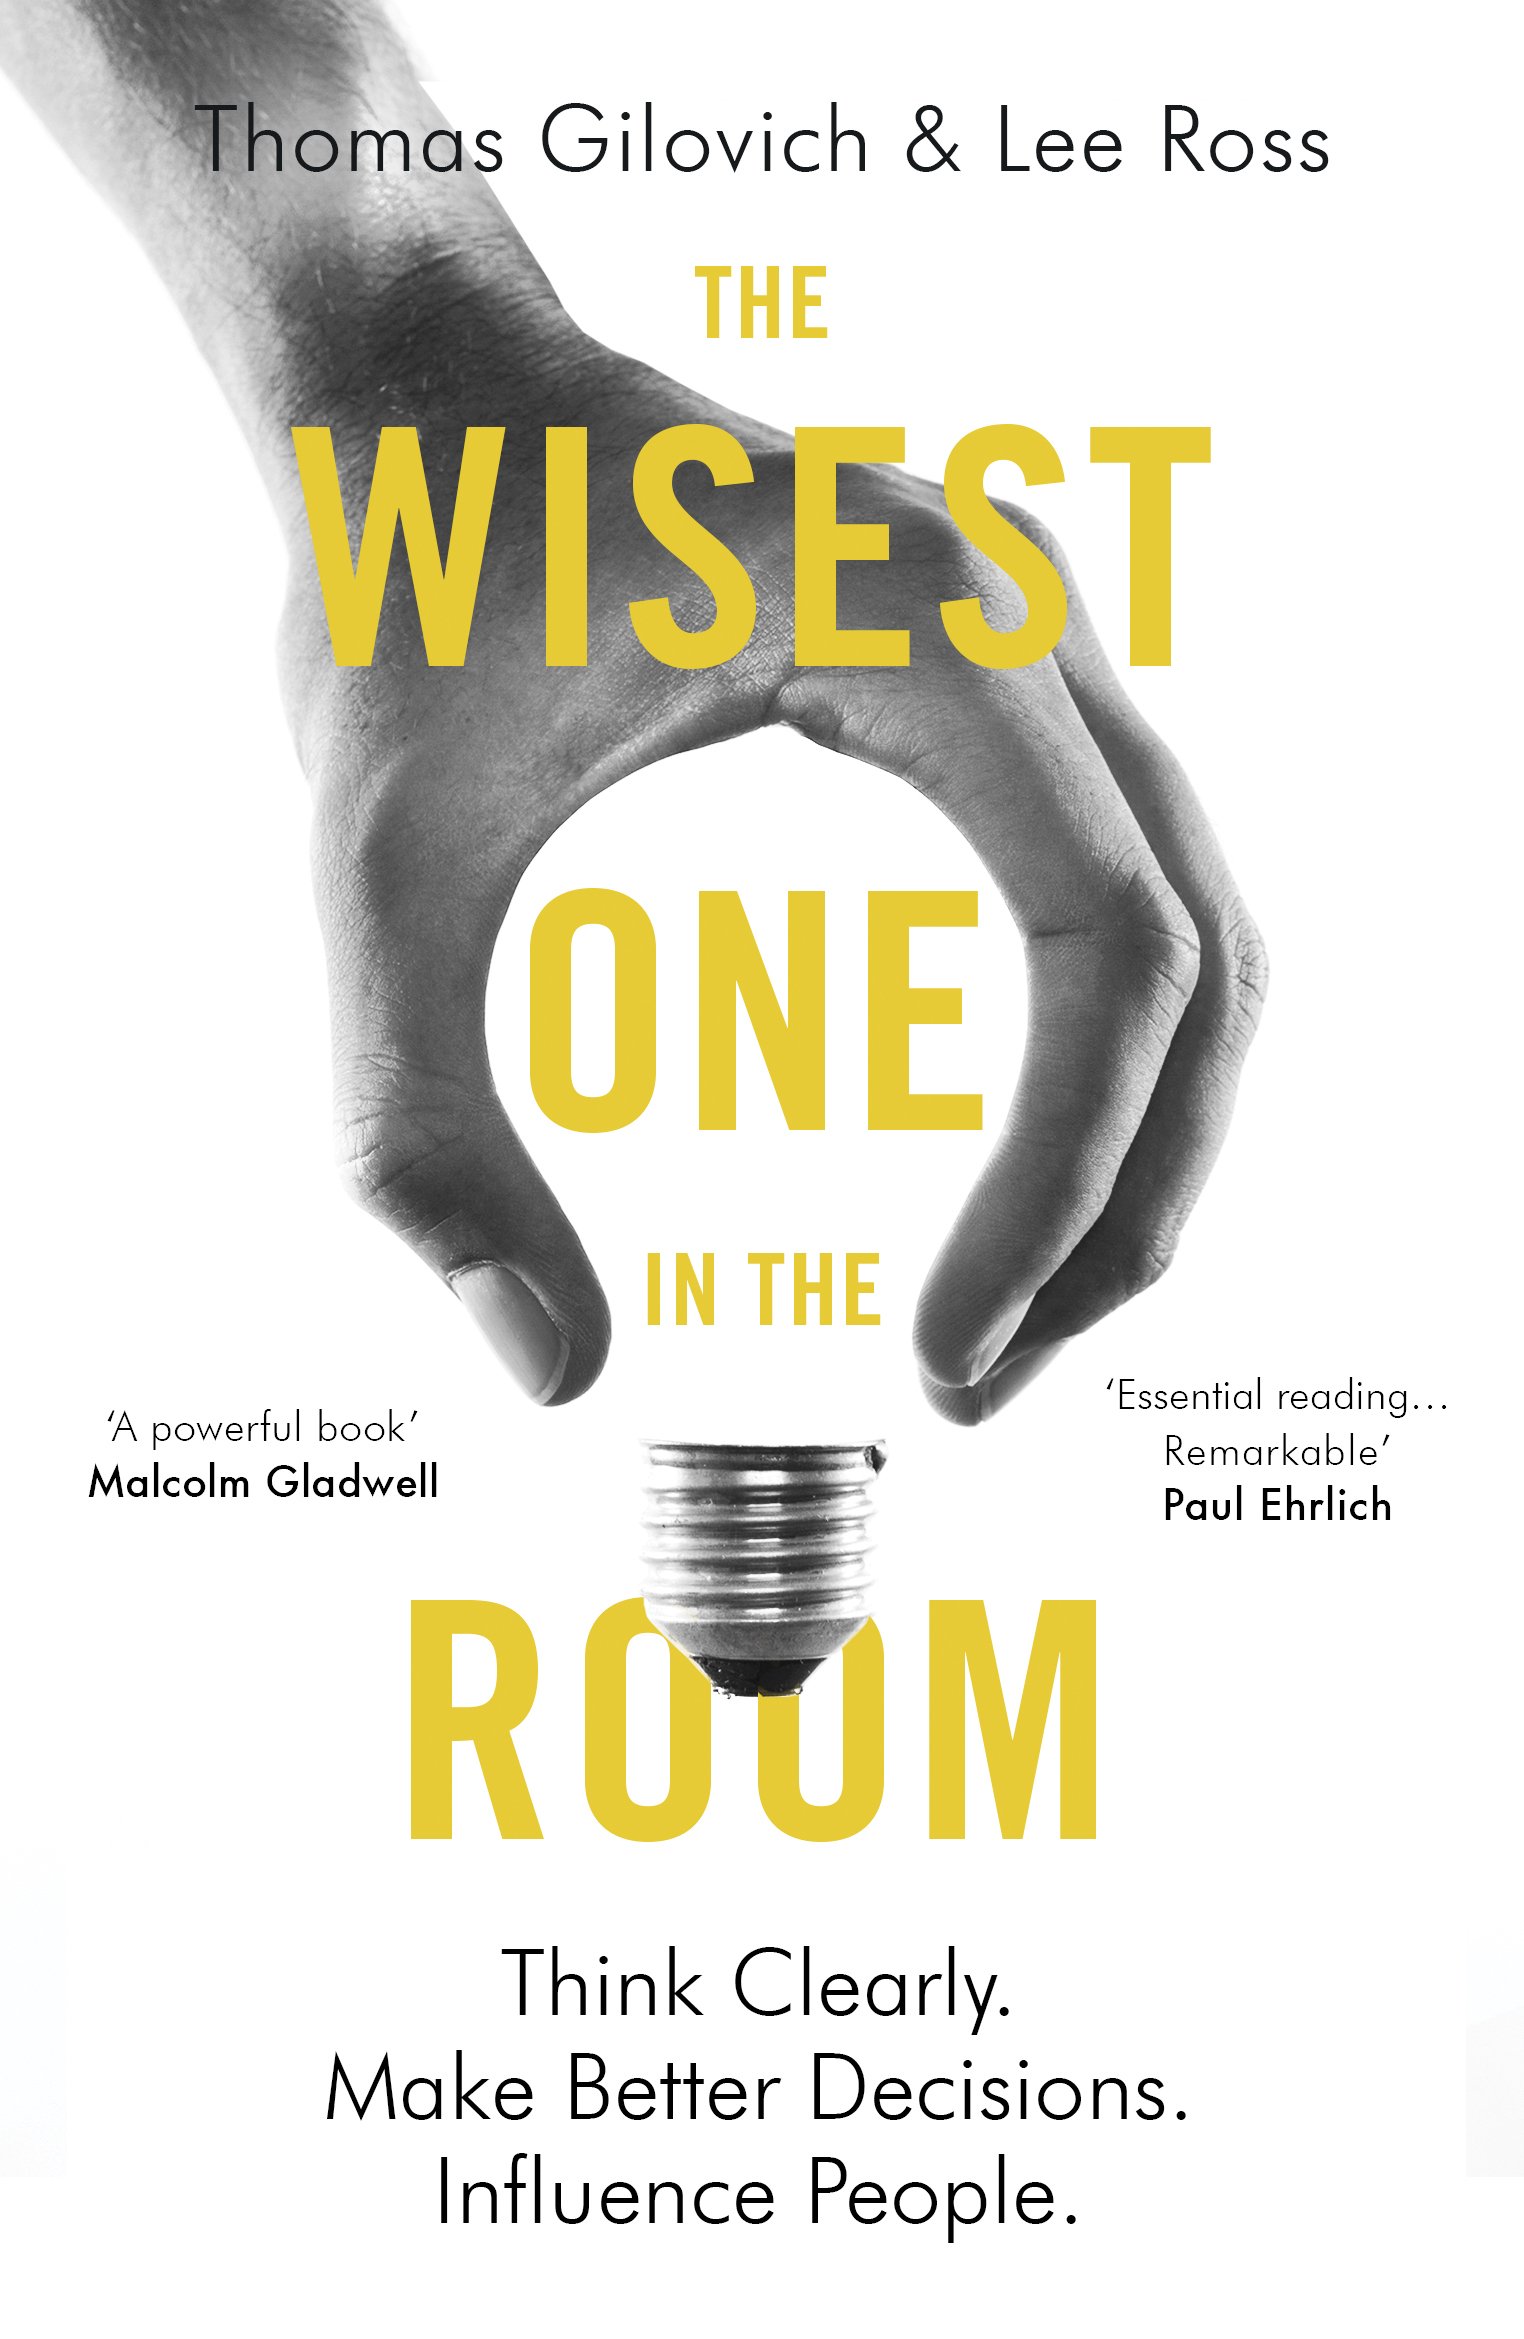 The Wisest One in the Room | Thomas Gilovich, Lee Ross